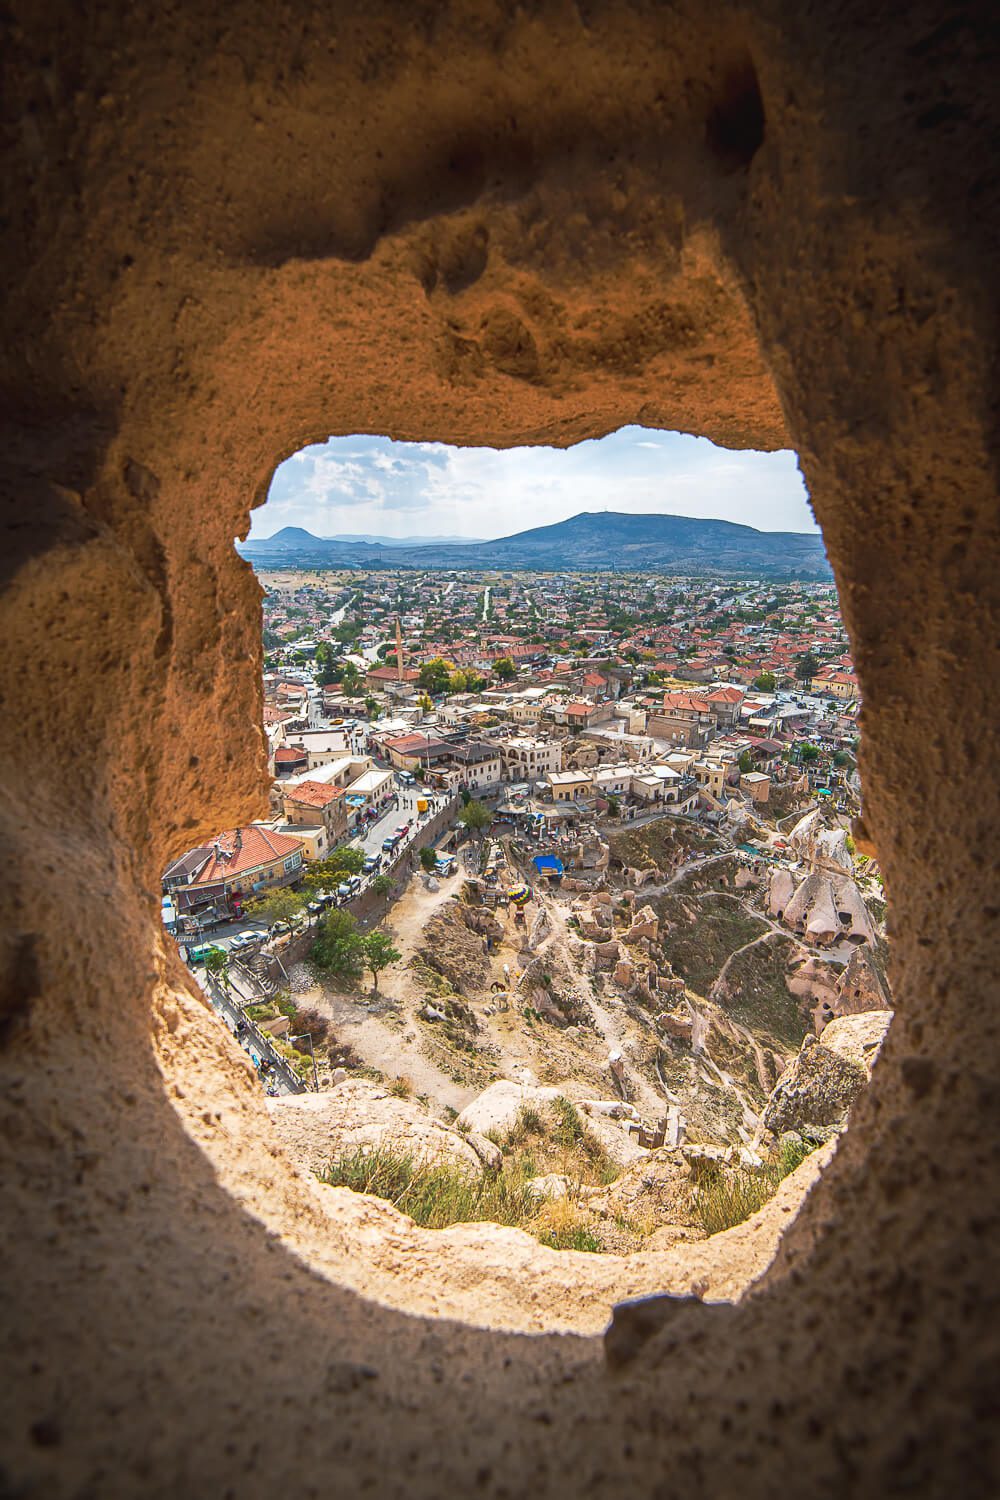 A view from the inside of Uchisar Castle